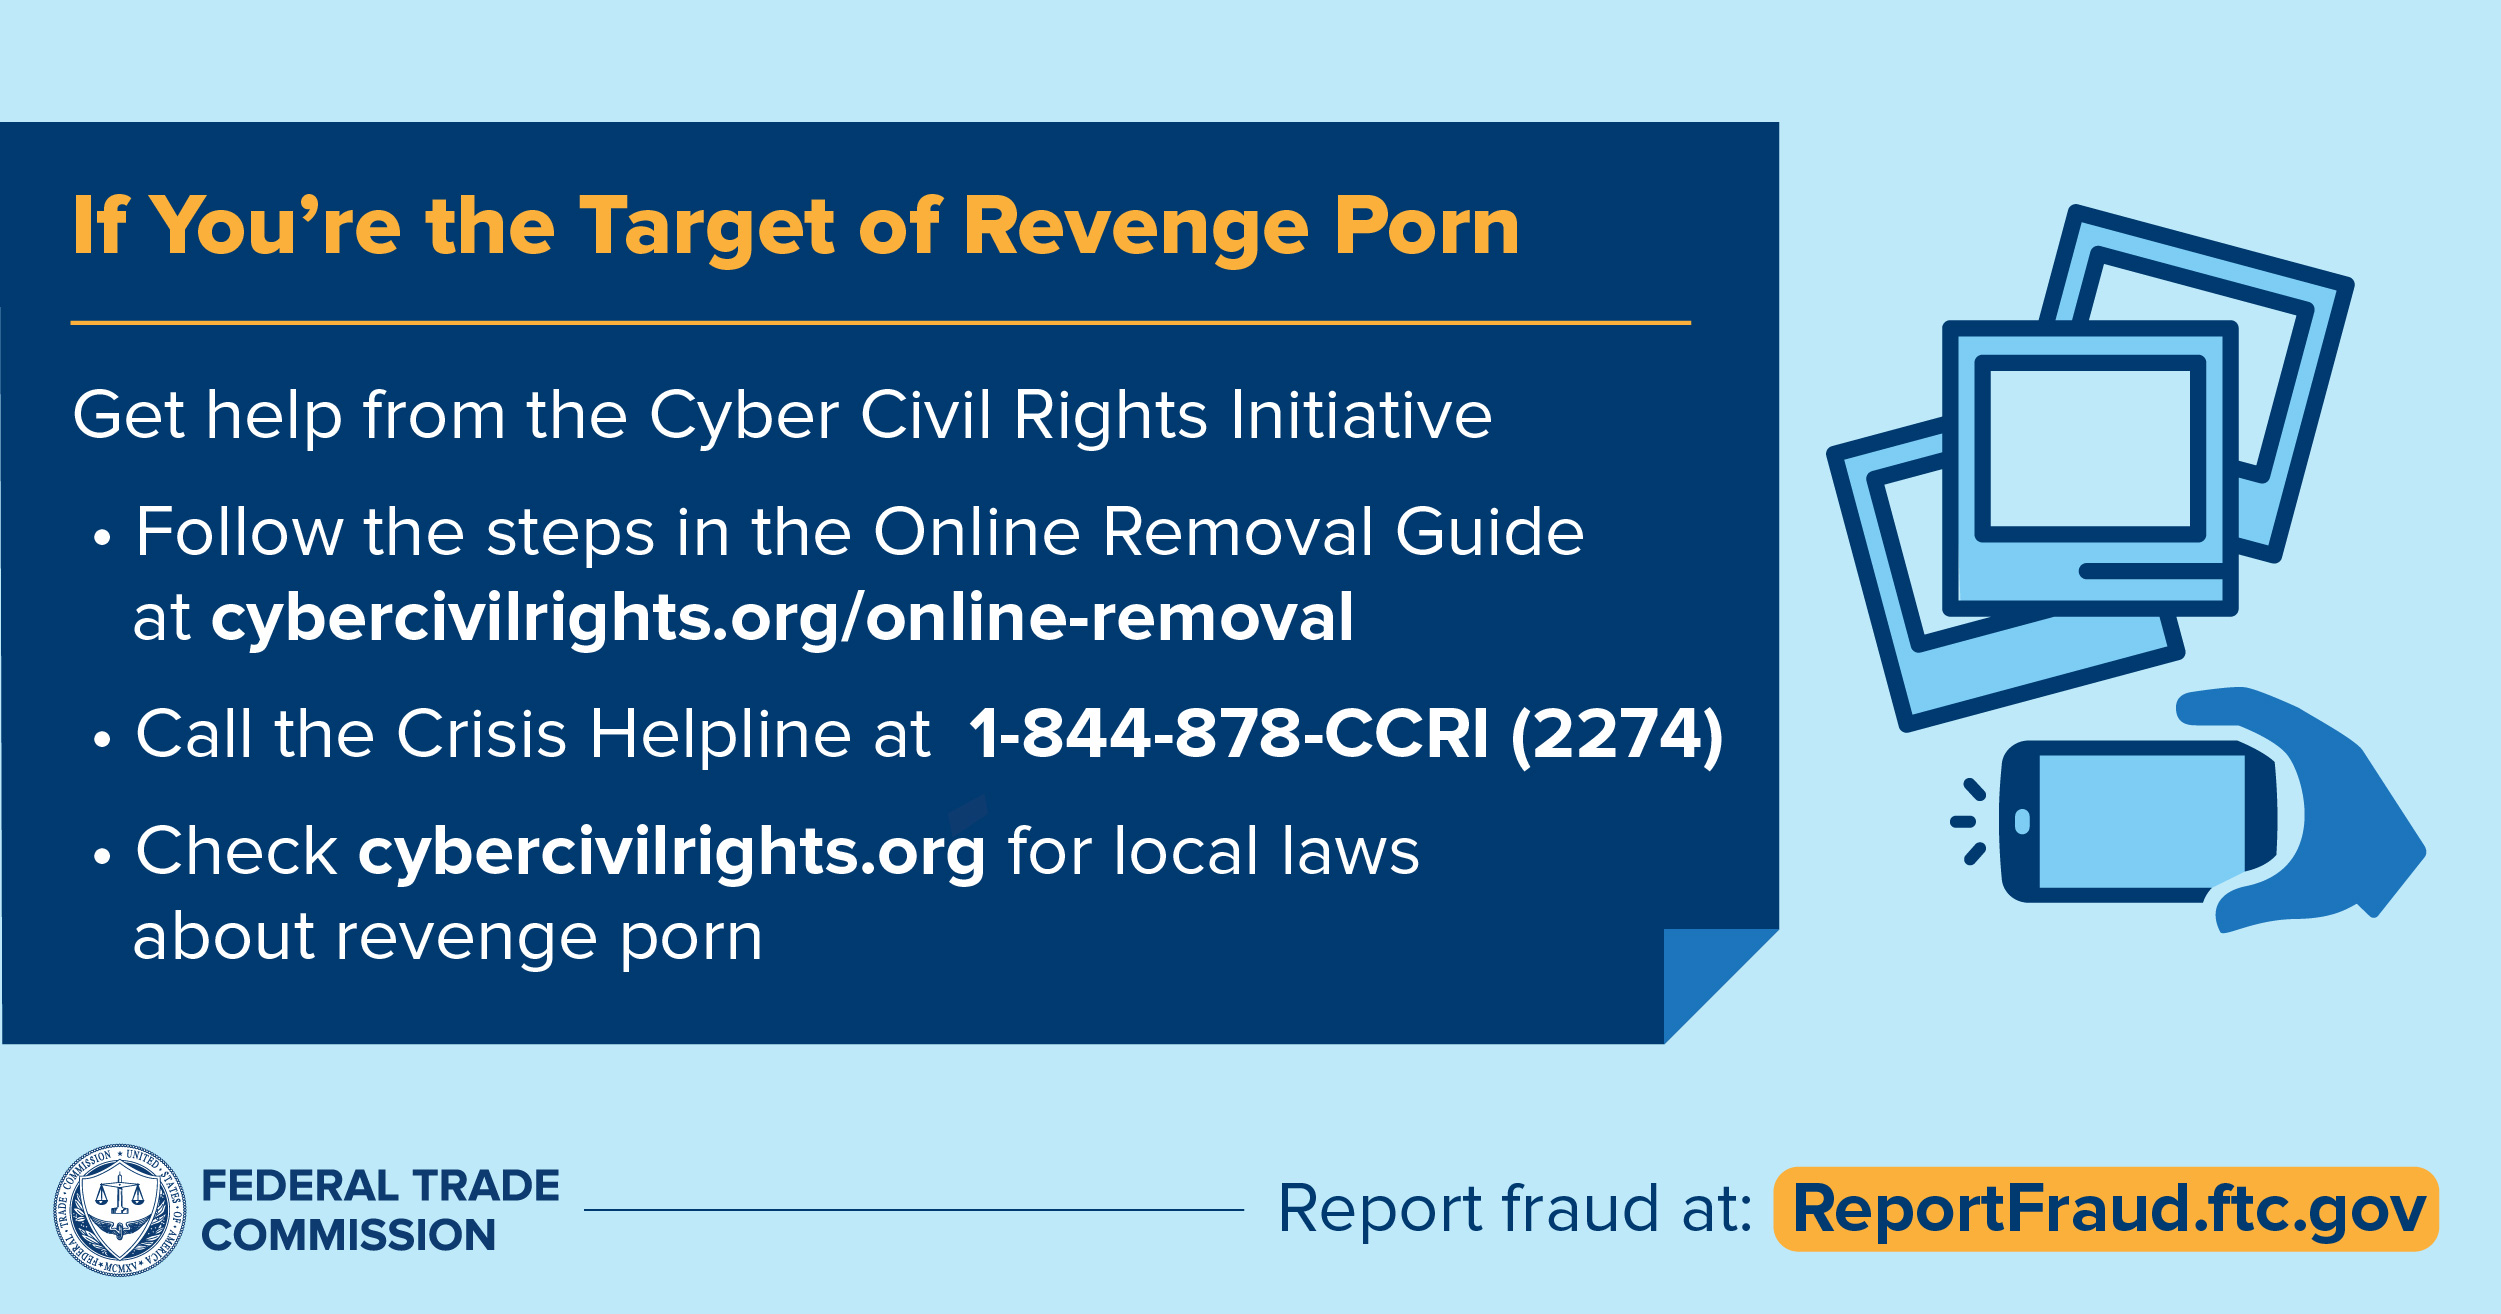 Bing Revenge Porn - What To Do if You're the Target of Revenge Porn | Consumer Advice